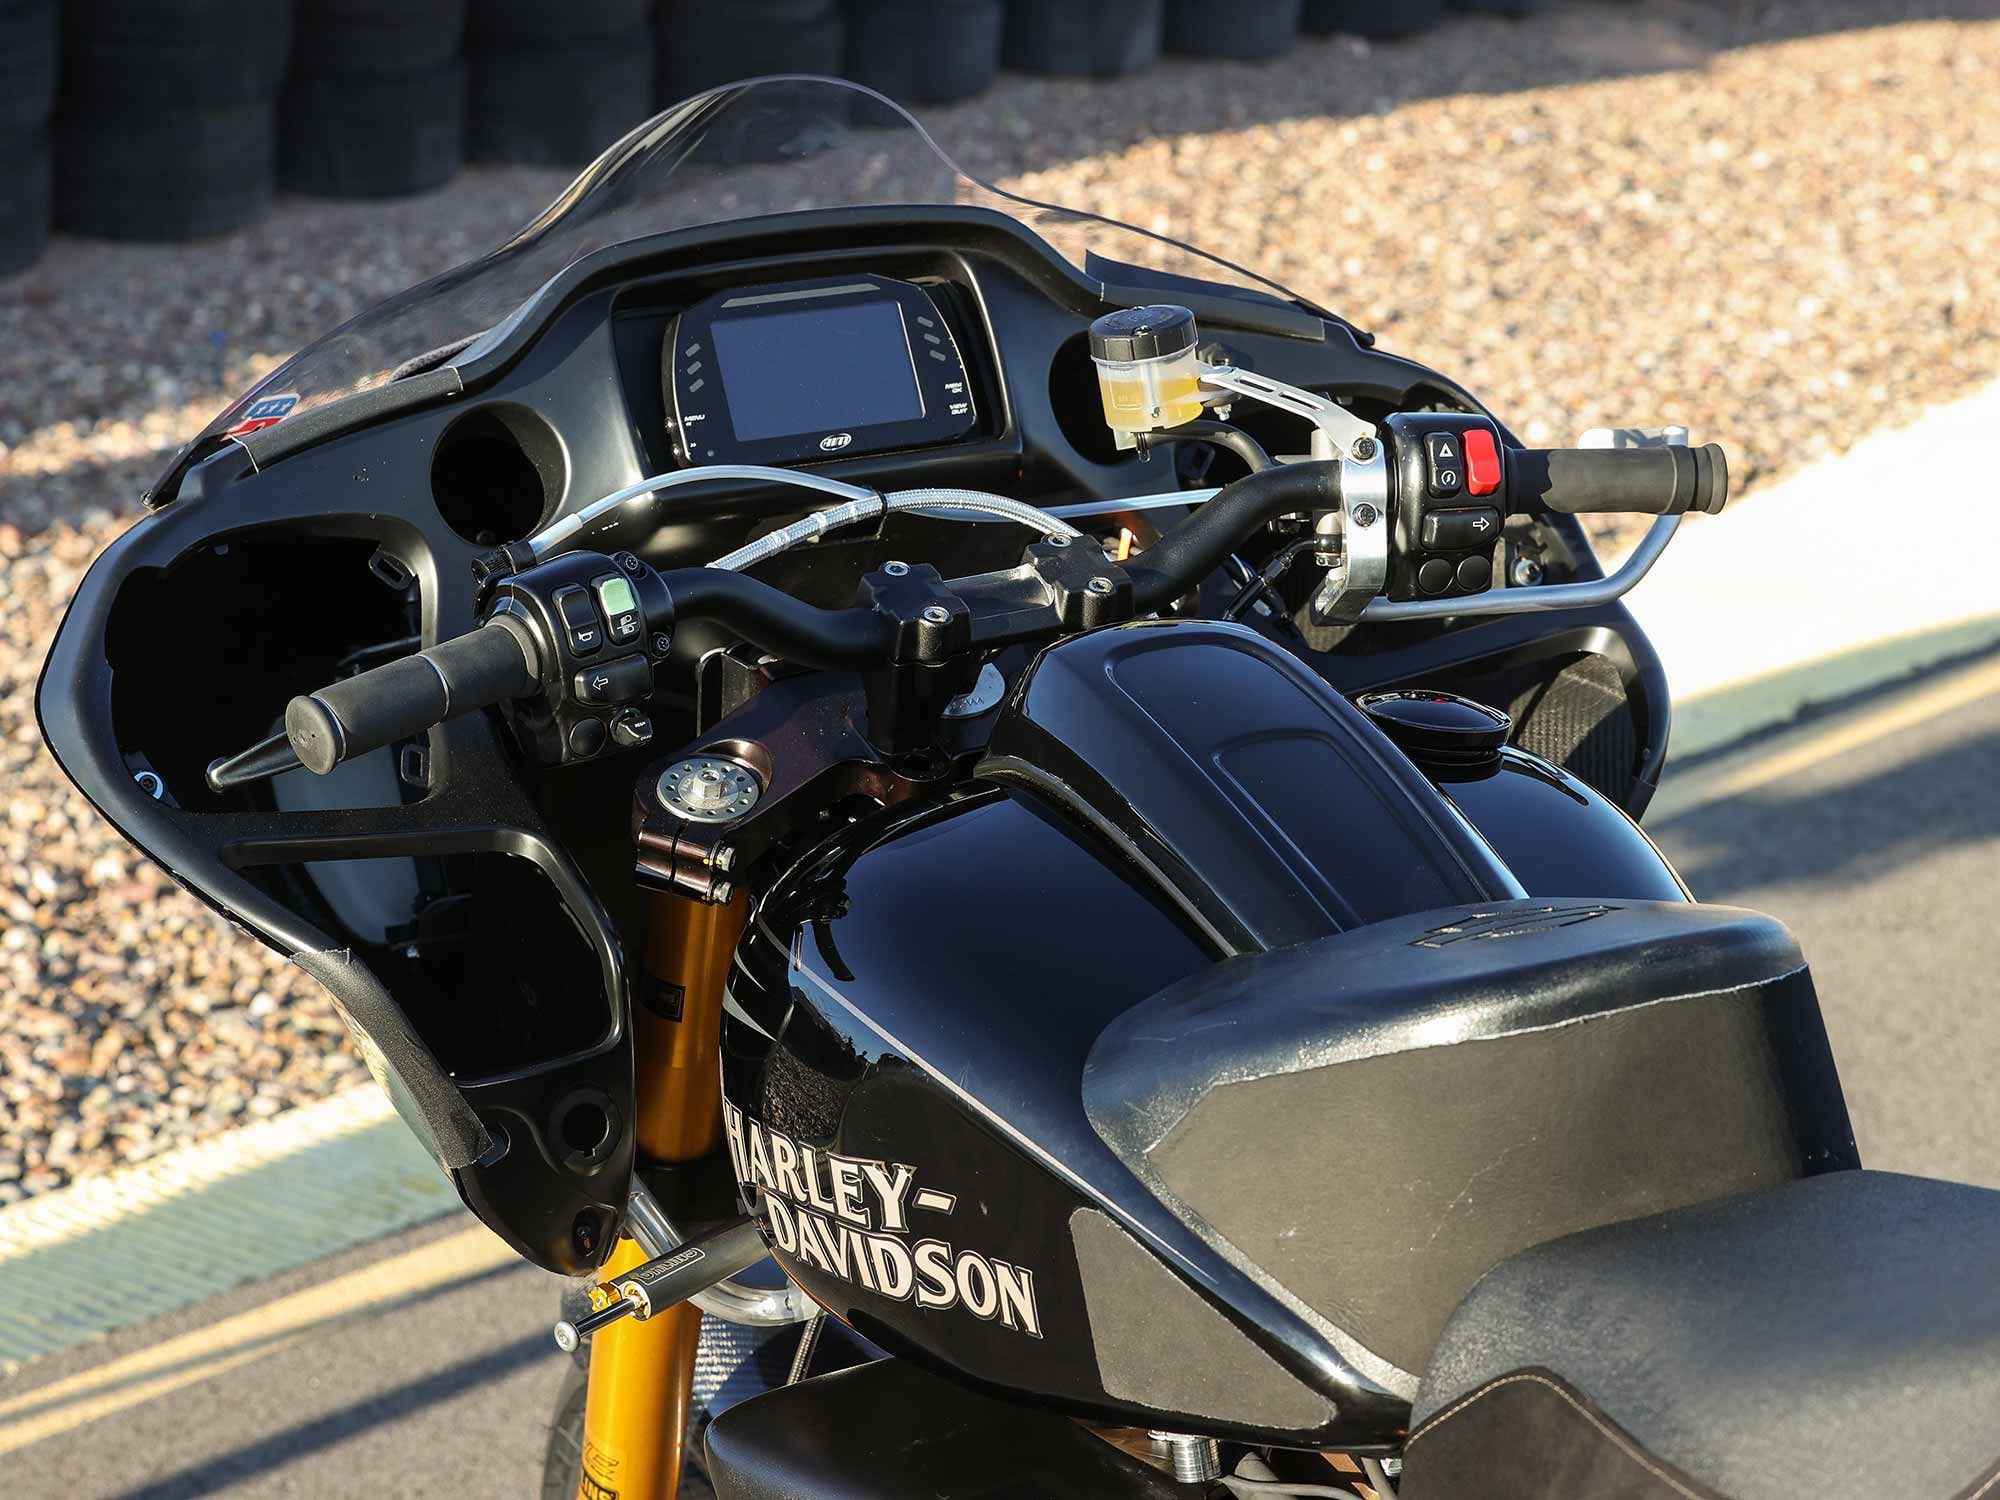 Harley-Davidson went to work creating a rider triangle closely resembling today’s traditional superbike albeit with a one-piece handlebar for maximum leverage. A 3D-printed tank pad adds a crucial contact point for Wyman.